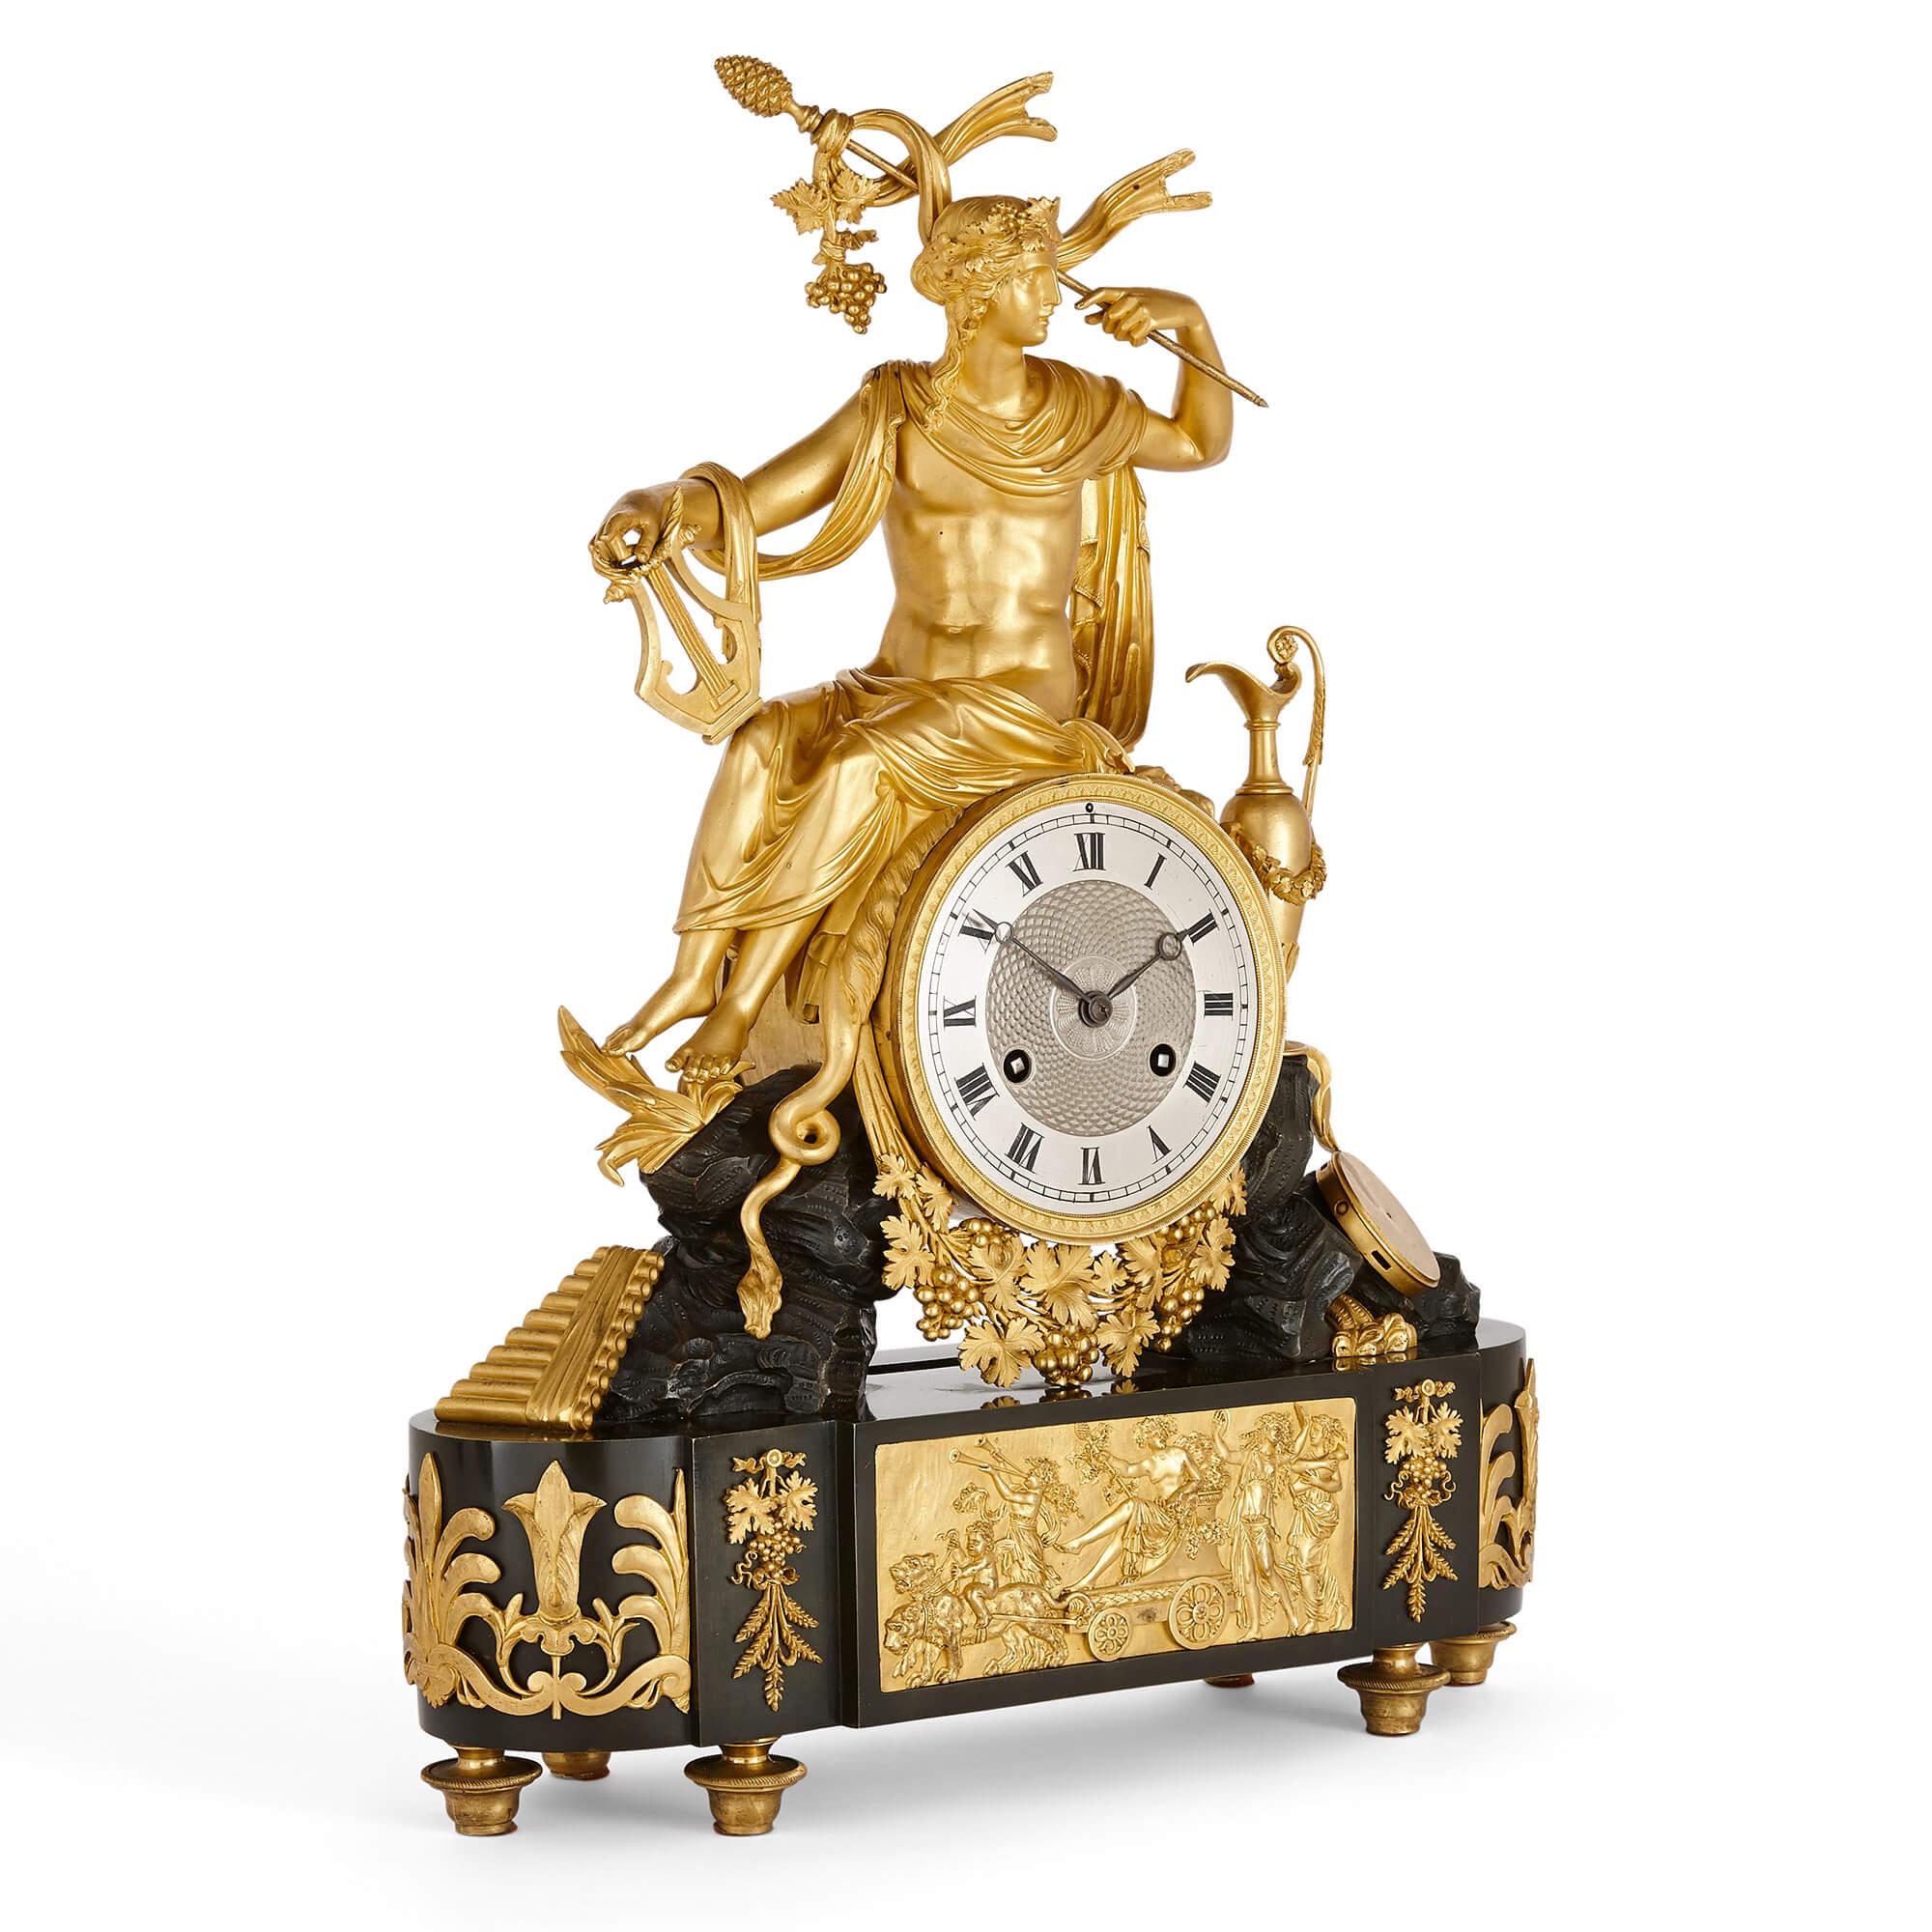 Antique French Empire patinated and gilt bronze mantel clock
French, early 19th century
Measures: Height 55cm, width 43cm, depth 13cm

This fine Empire period mantel clock is wrought from patinated and gilt bronze. The clock features a large